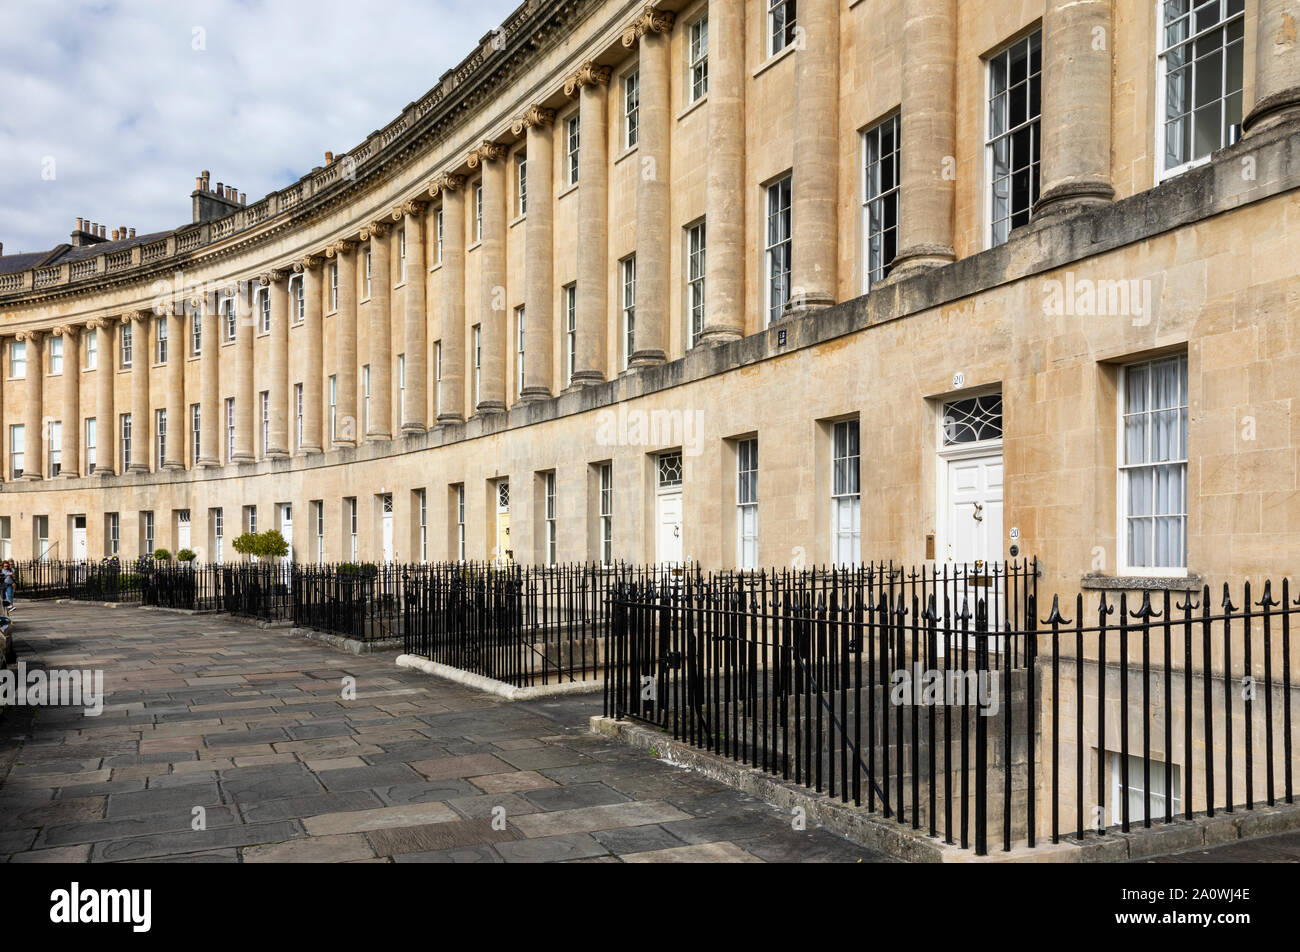 18th Century Georgian Architecture of The Royal Crescent, City of Bath, Somerset, England, UK. A UNESCO World Heritage Site. Stock Photo